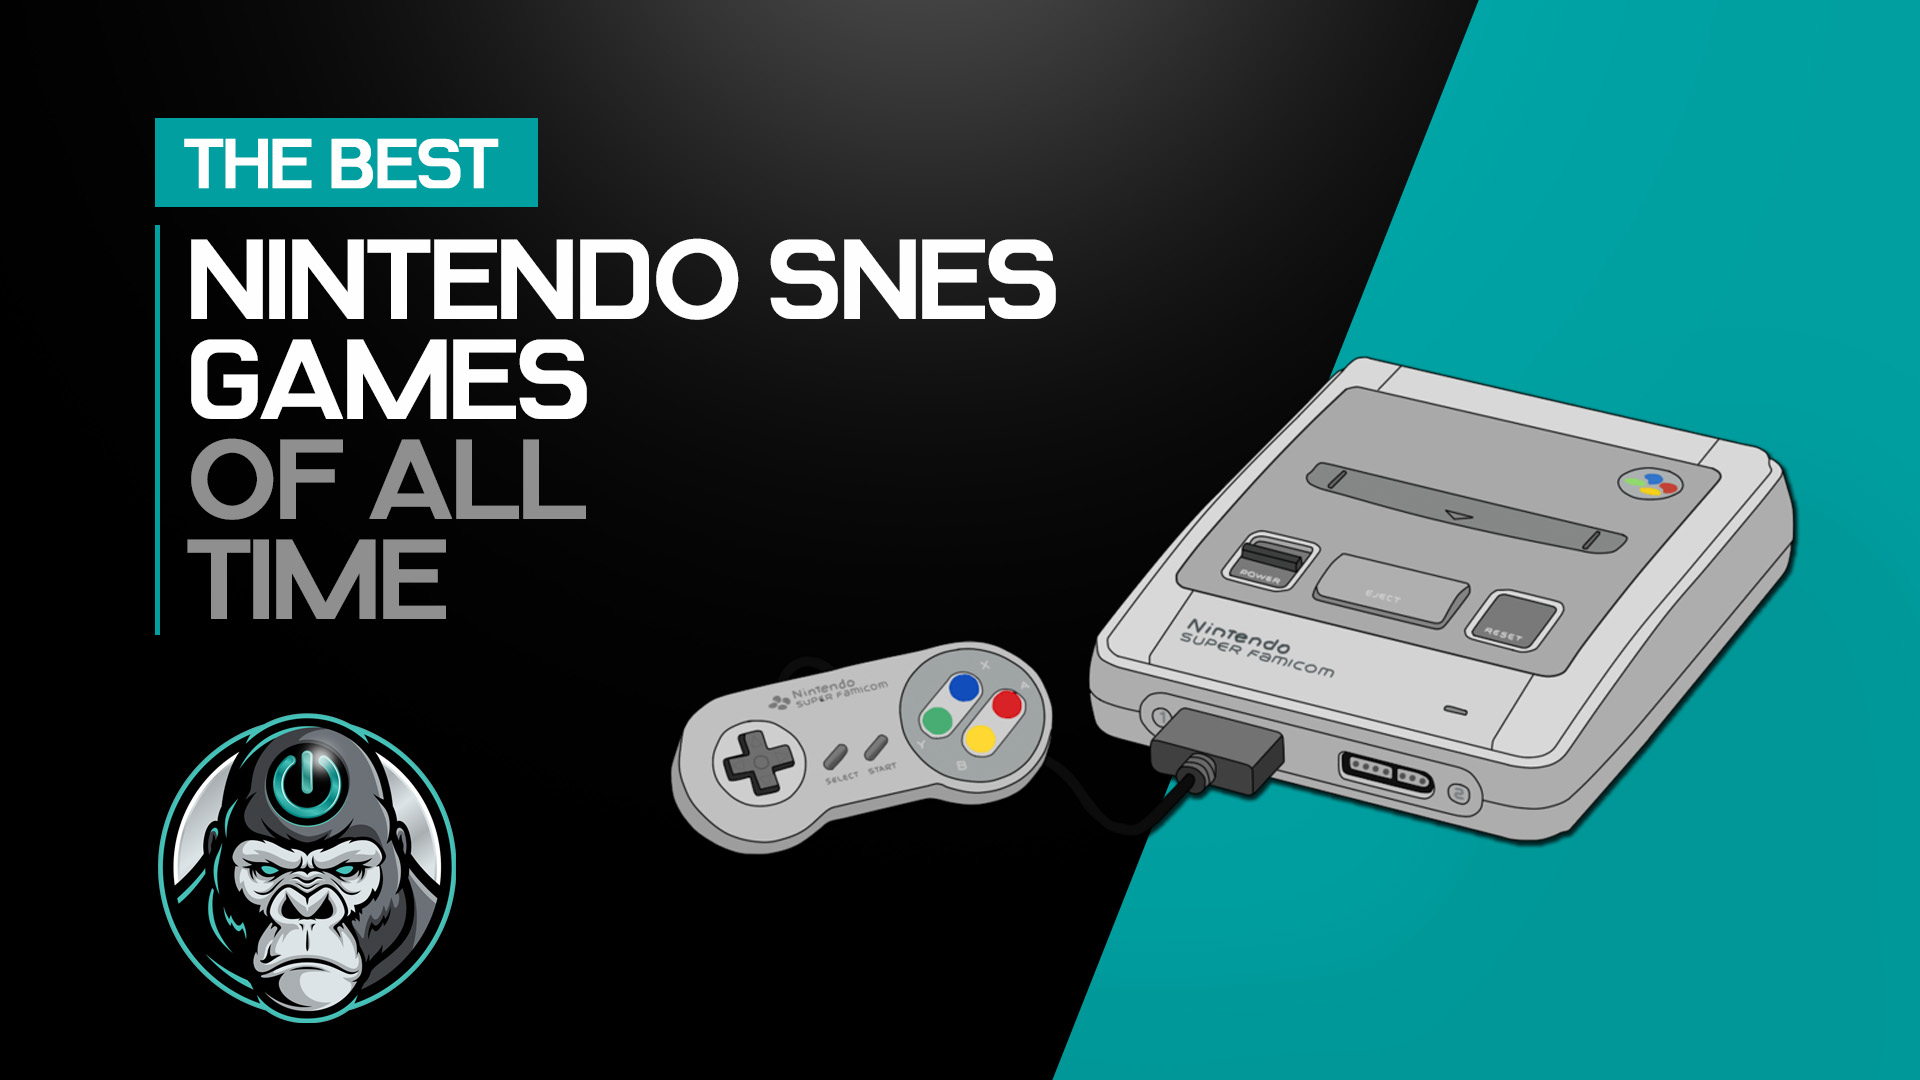 The Best Nintendo SNES Games of All Time